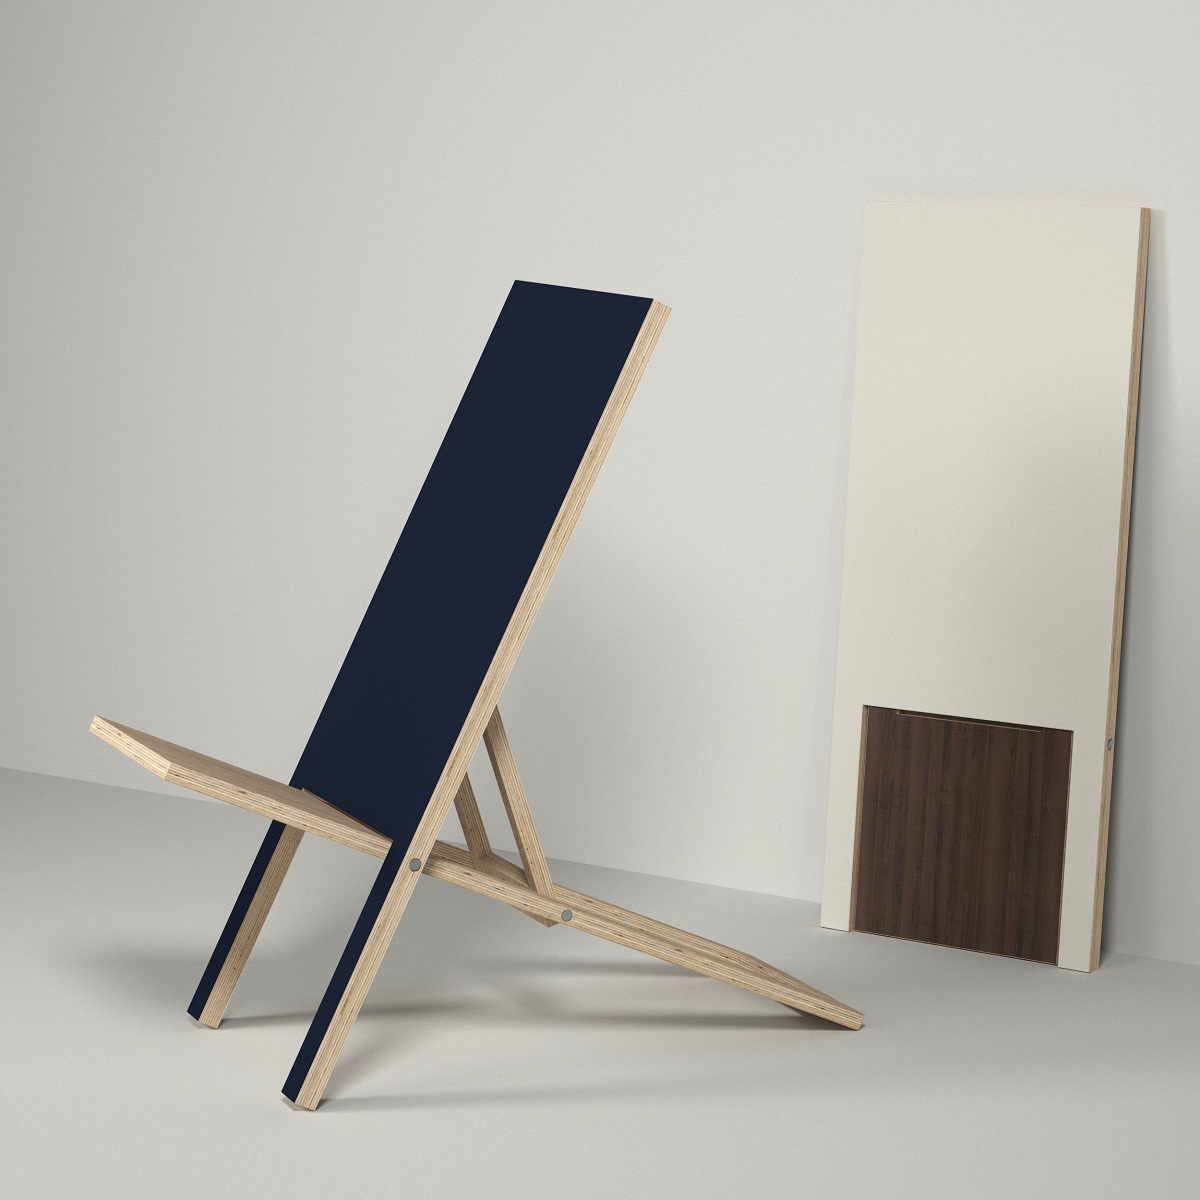 foldable low deckchair in black and natural wood designed by Kostas Synodis